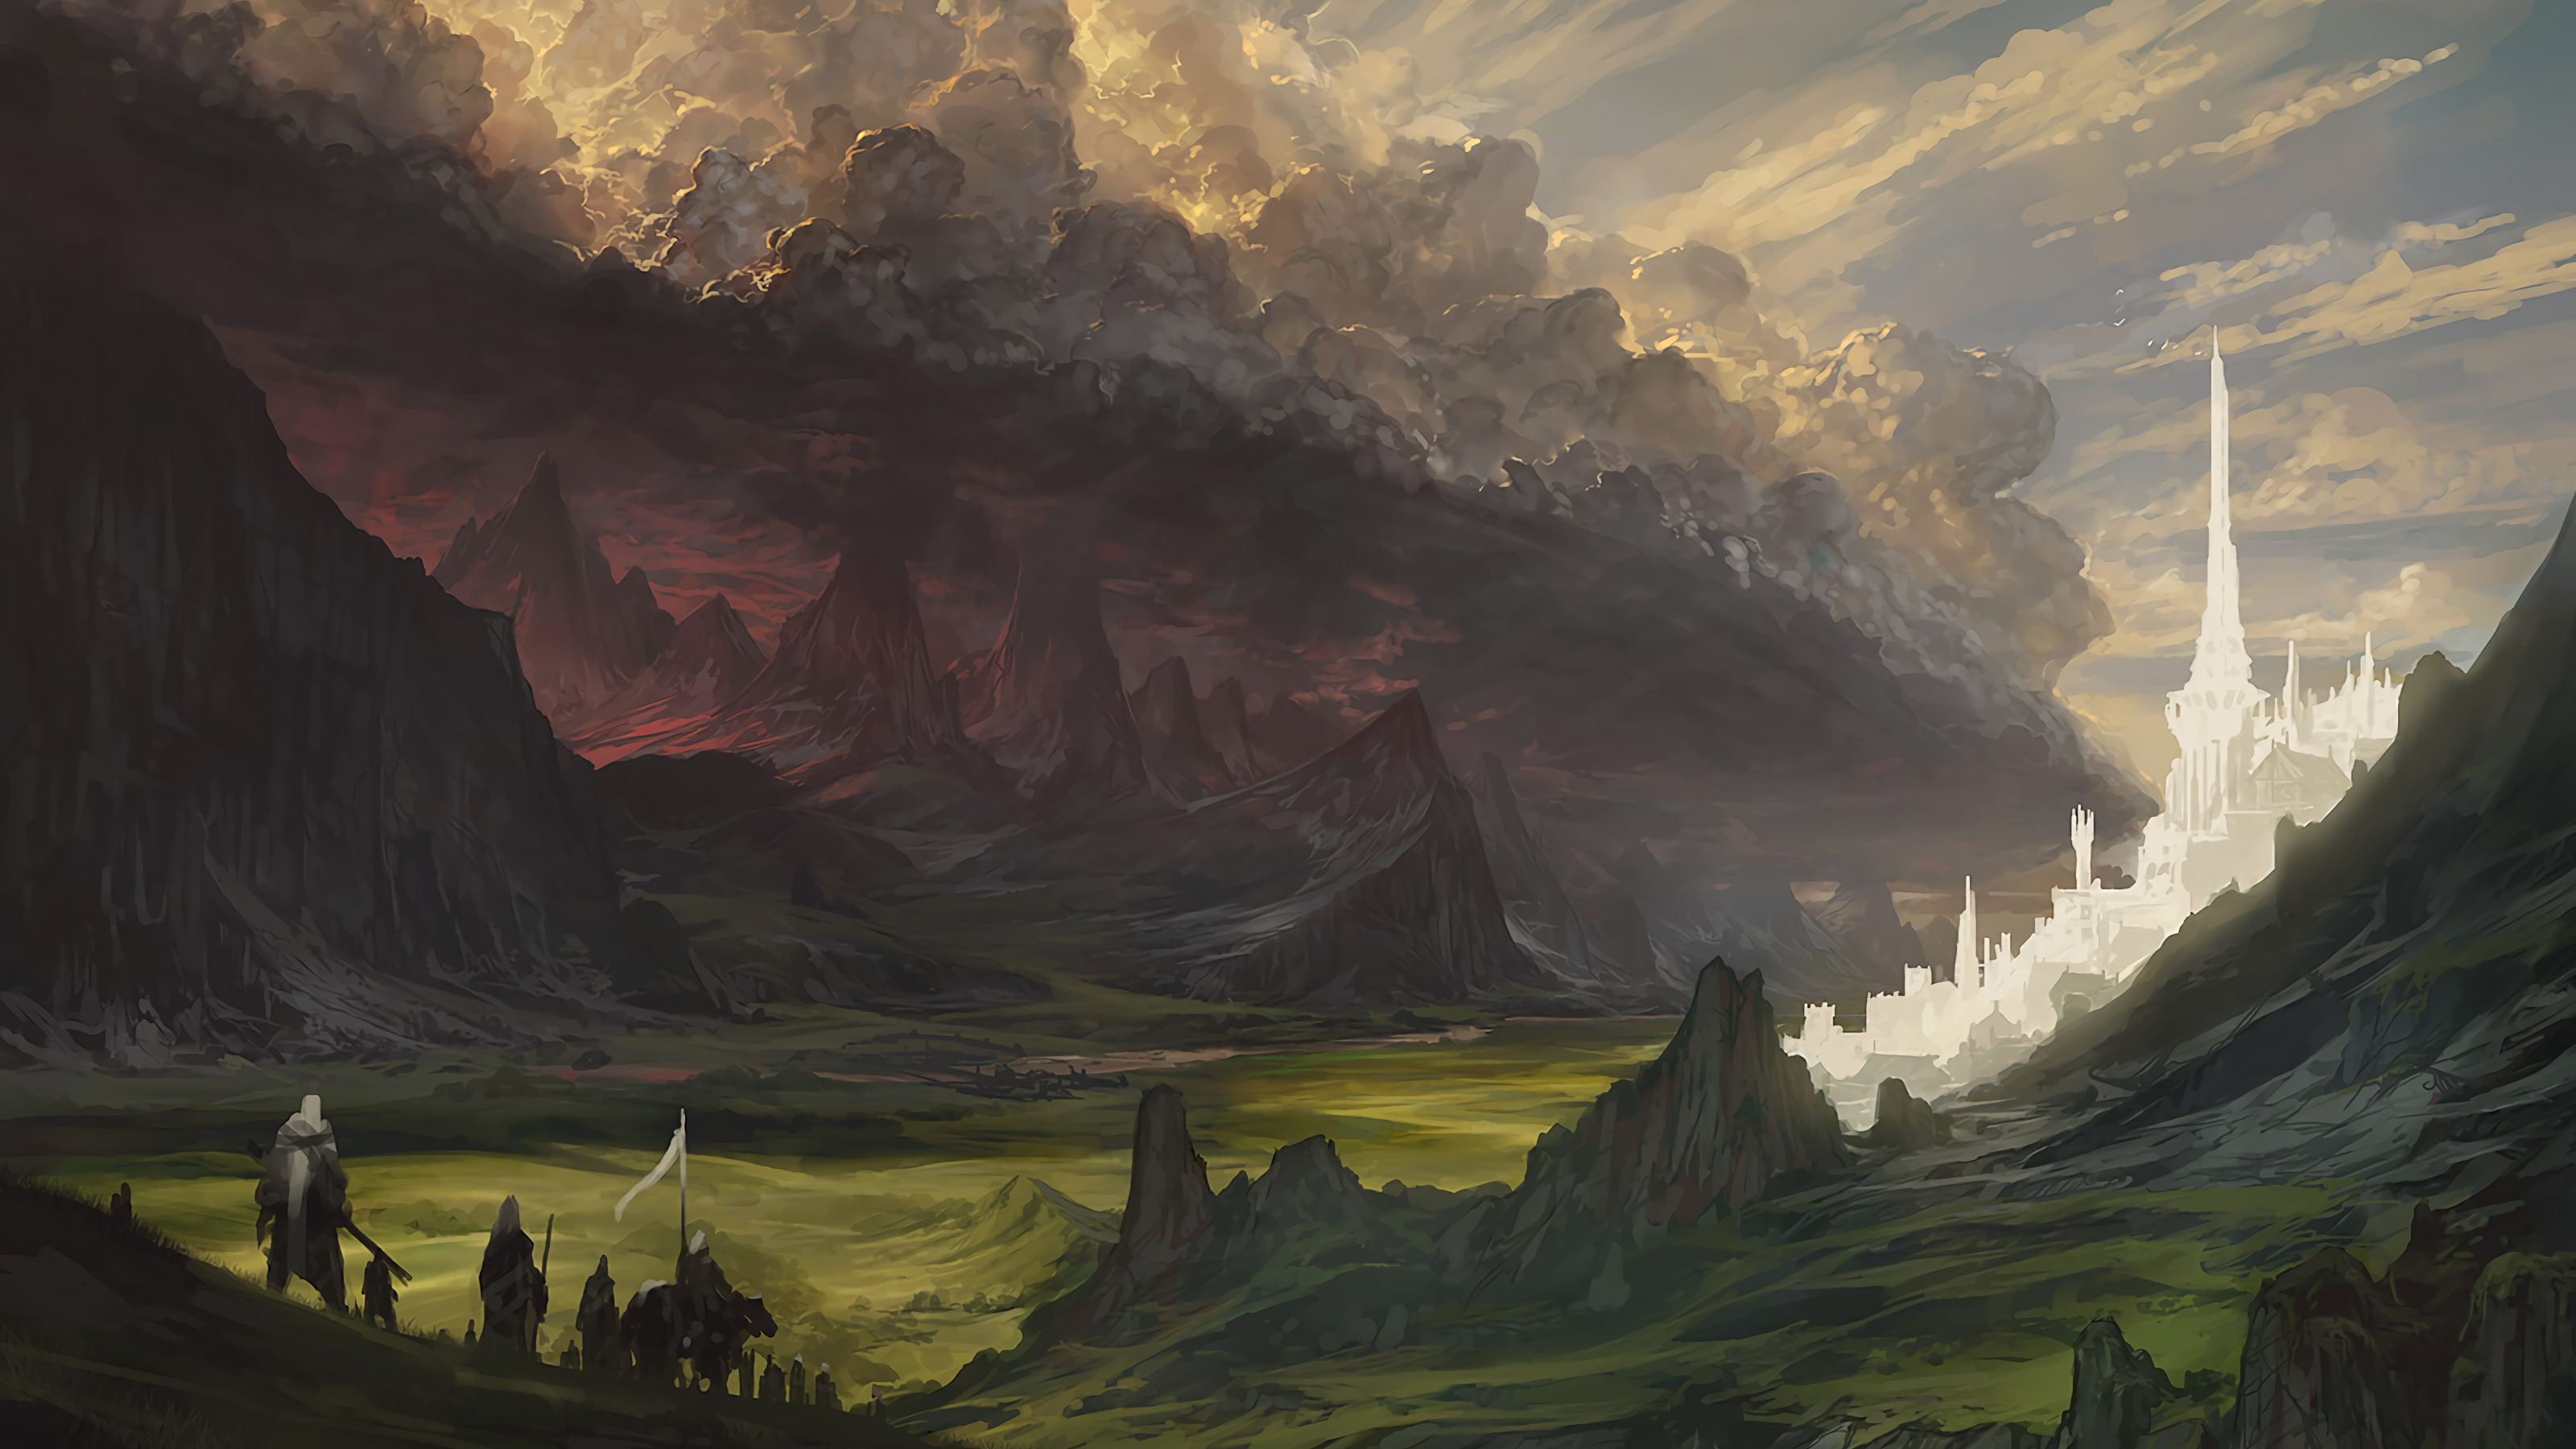 General 3200x1800 city landscape fantasy art The Lord of the Rings Minas Tirith artwork